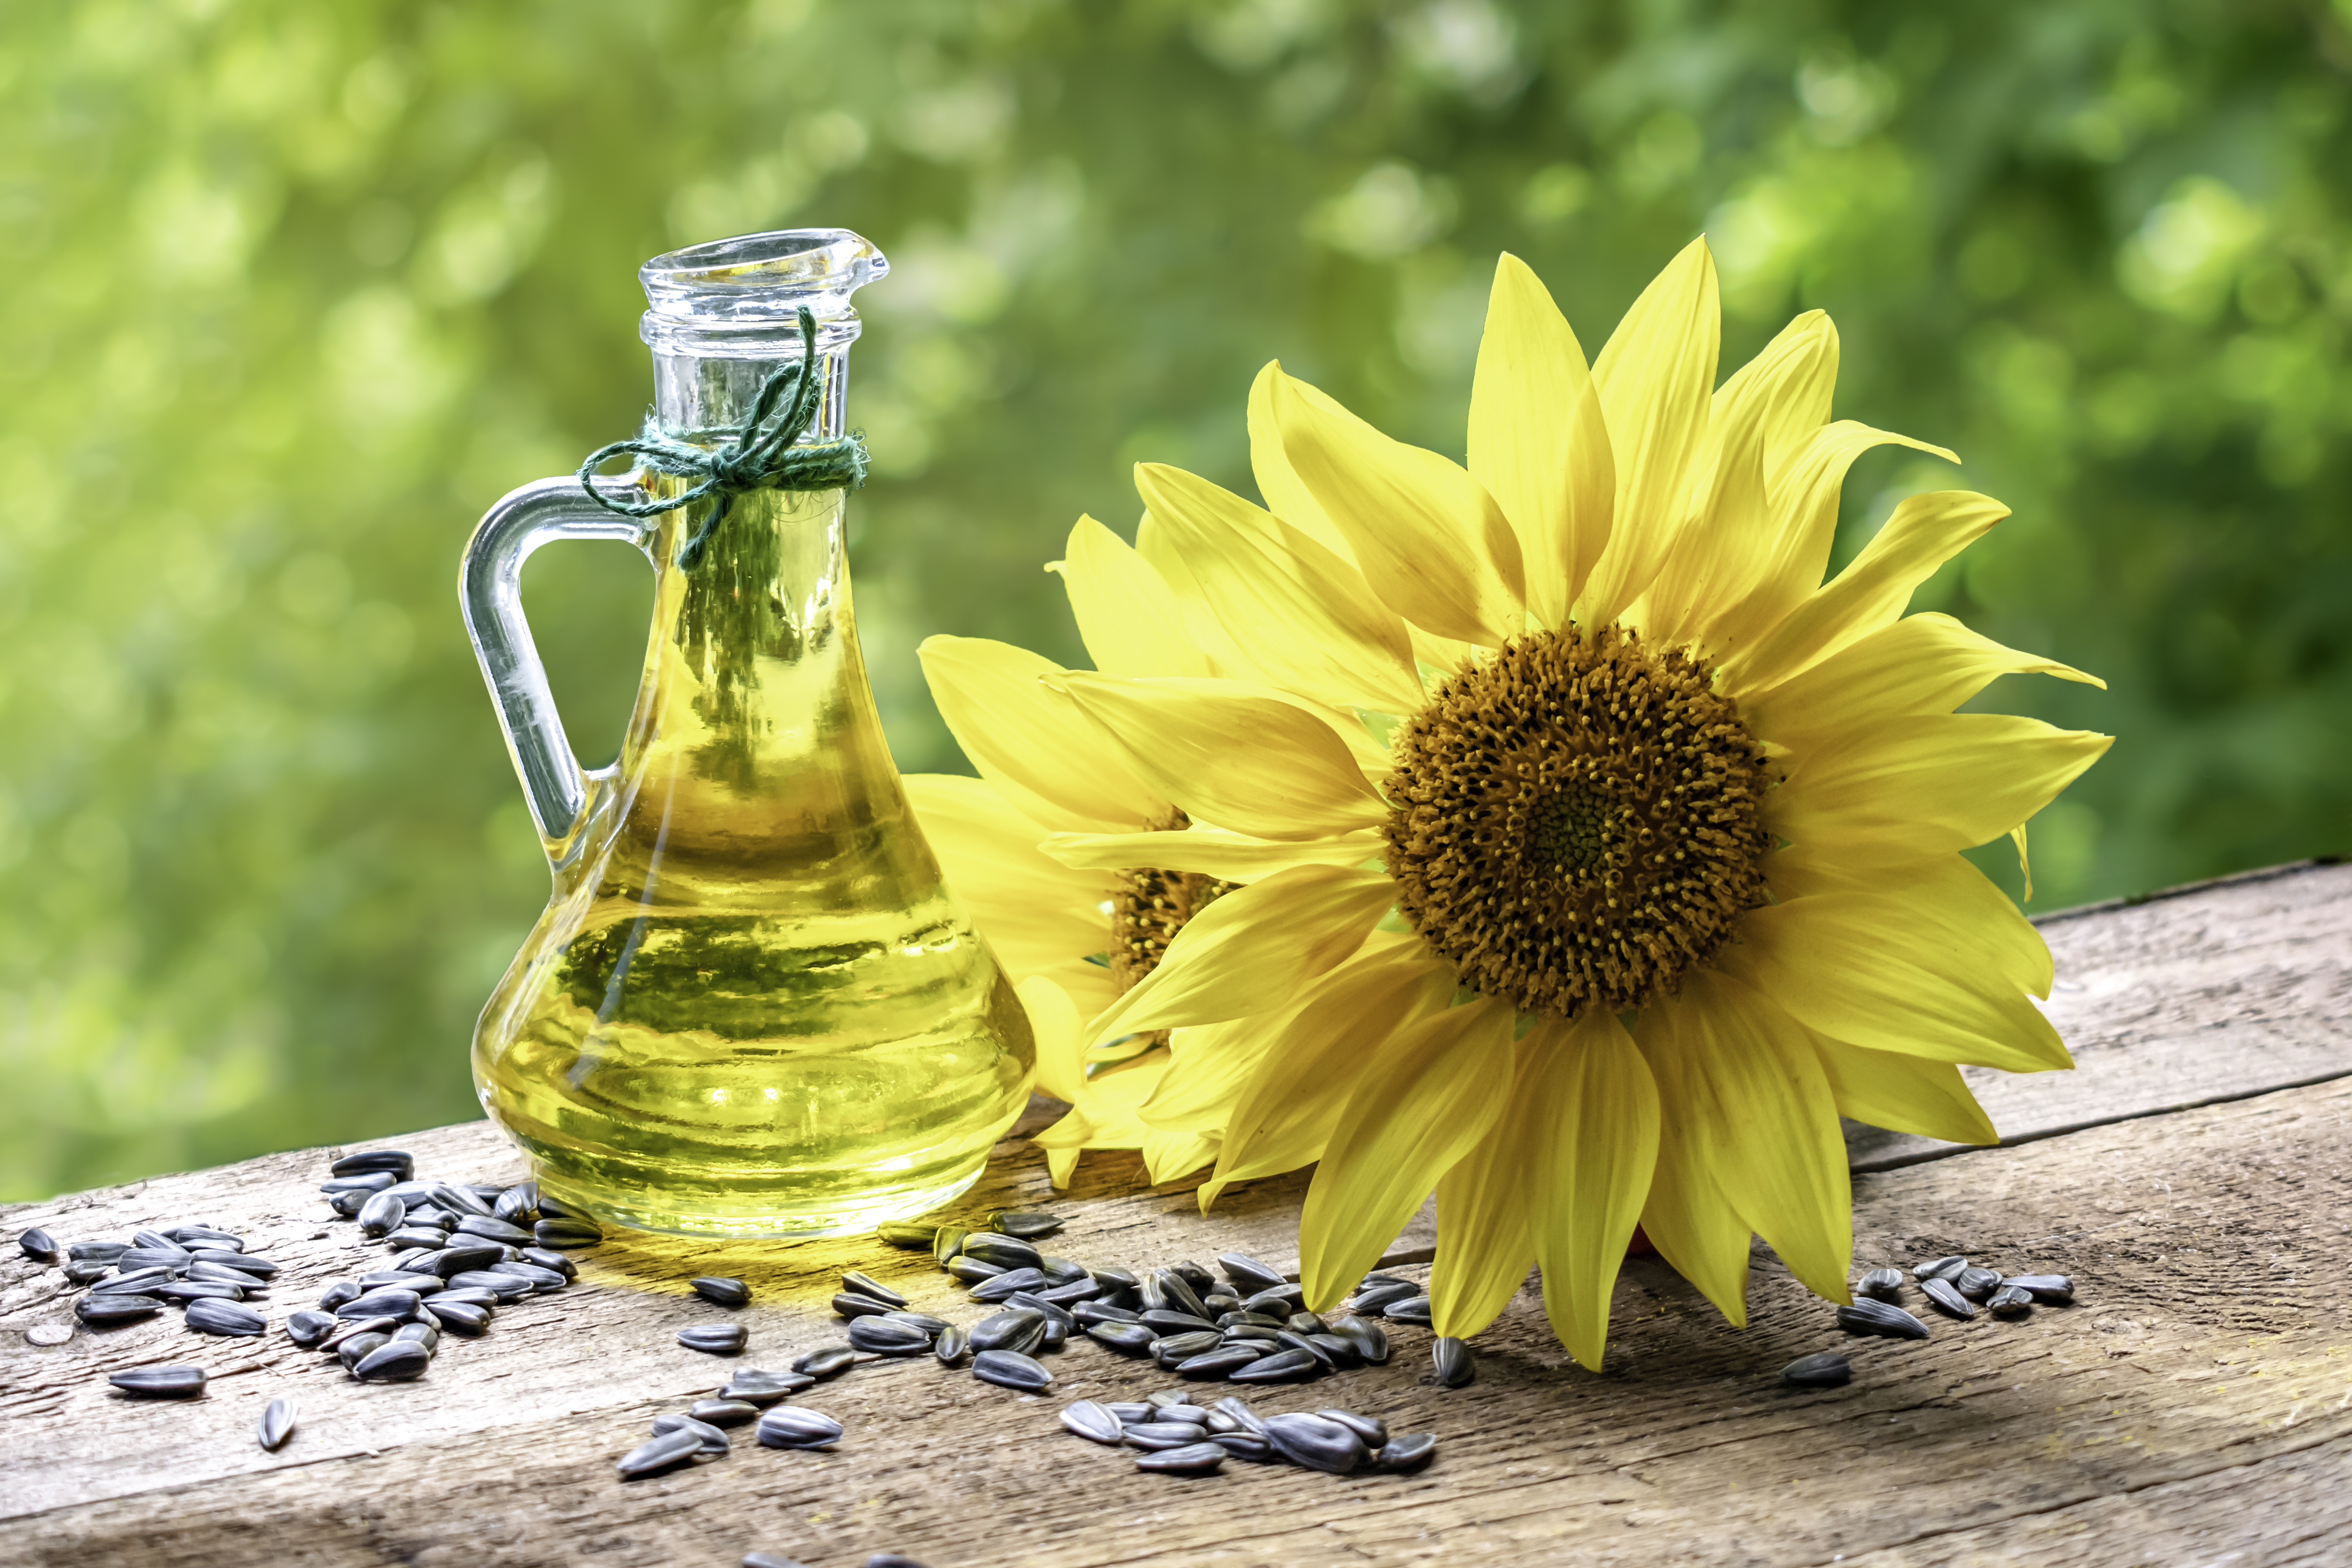 A bottle of sunflower seed oil on a wooden table with a sunflower and sunflower seeds